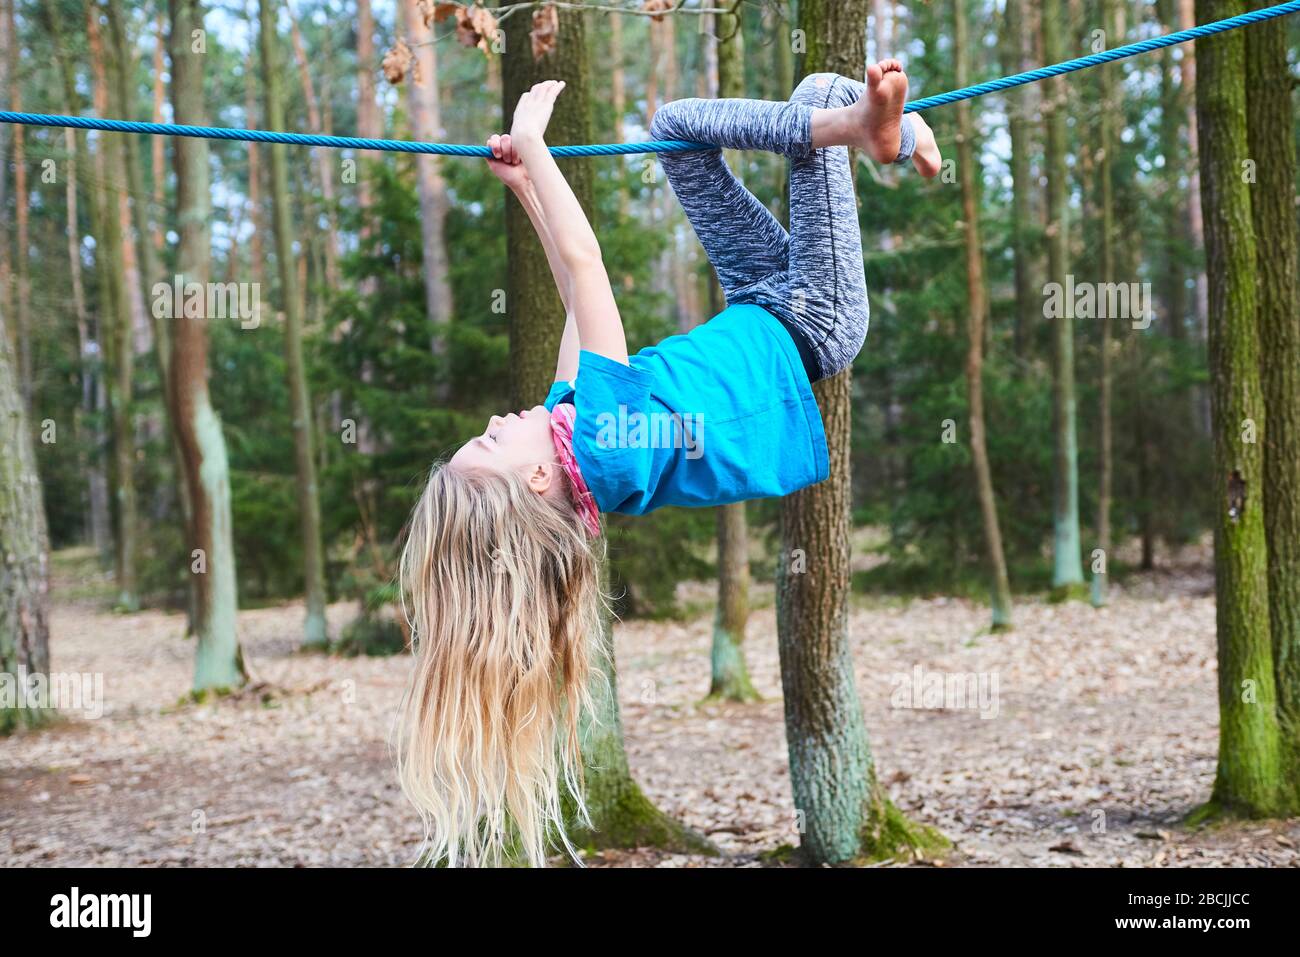 Young child girl hanging on rope upside down on playground in park Stock Photo